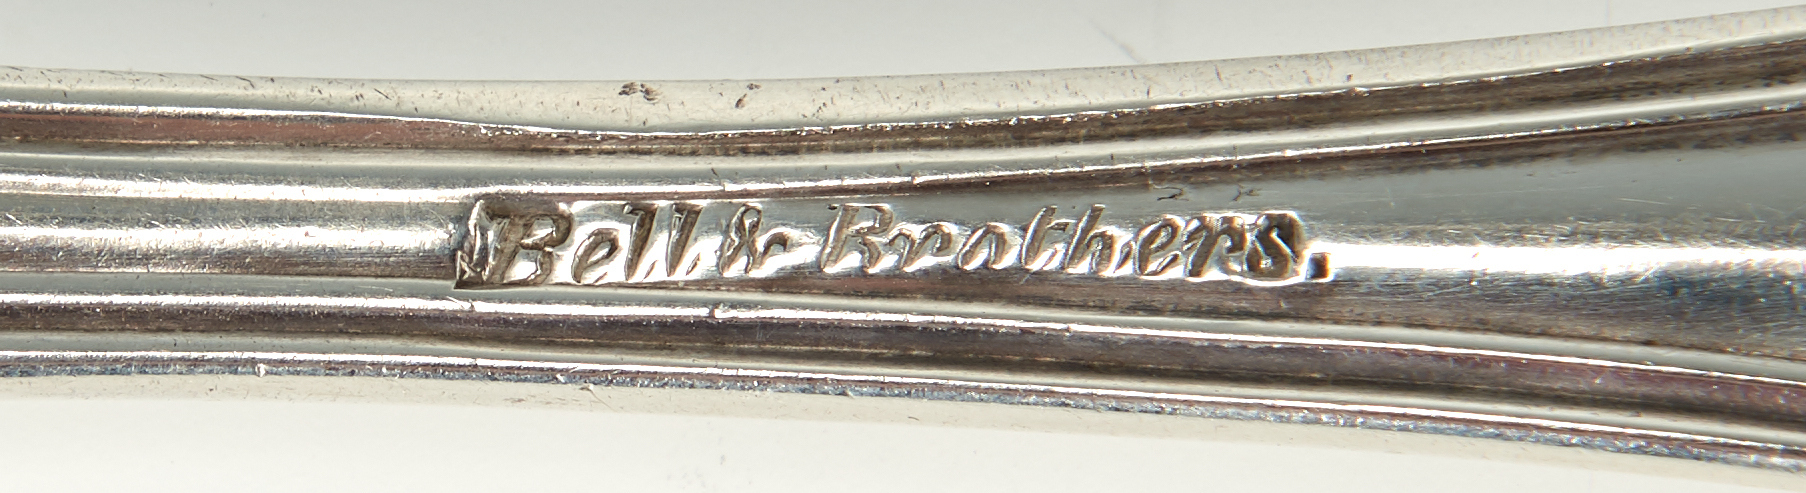 Lot 75: Two Coin Silver Forks, Bell & Bros. TX